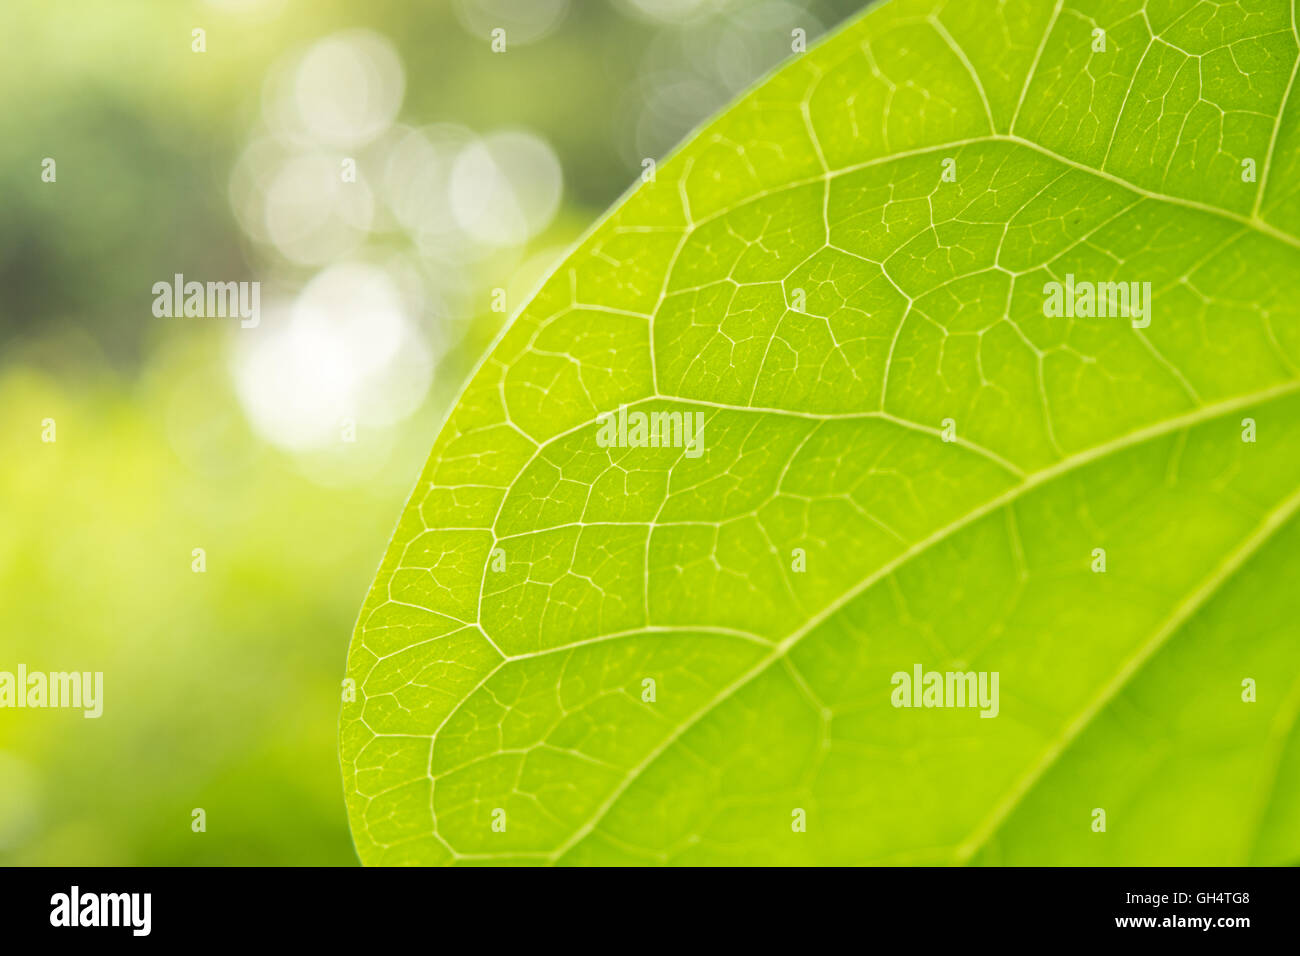 Leaf Veins close-up Sunlight Green Nature Background Stock Photo